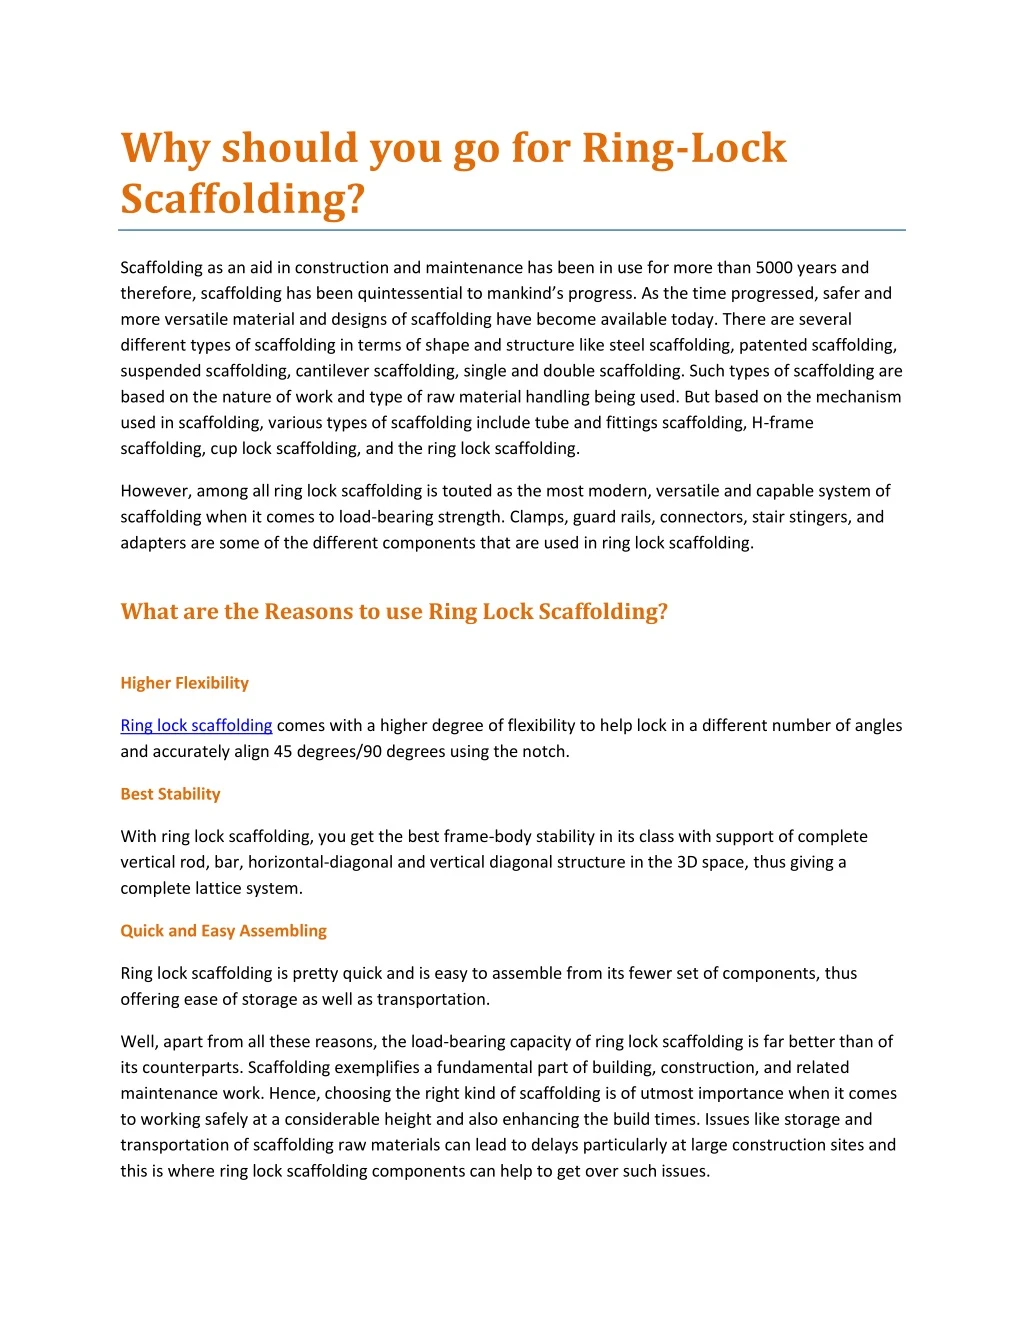 why should you go for ring lock scaffolding